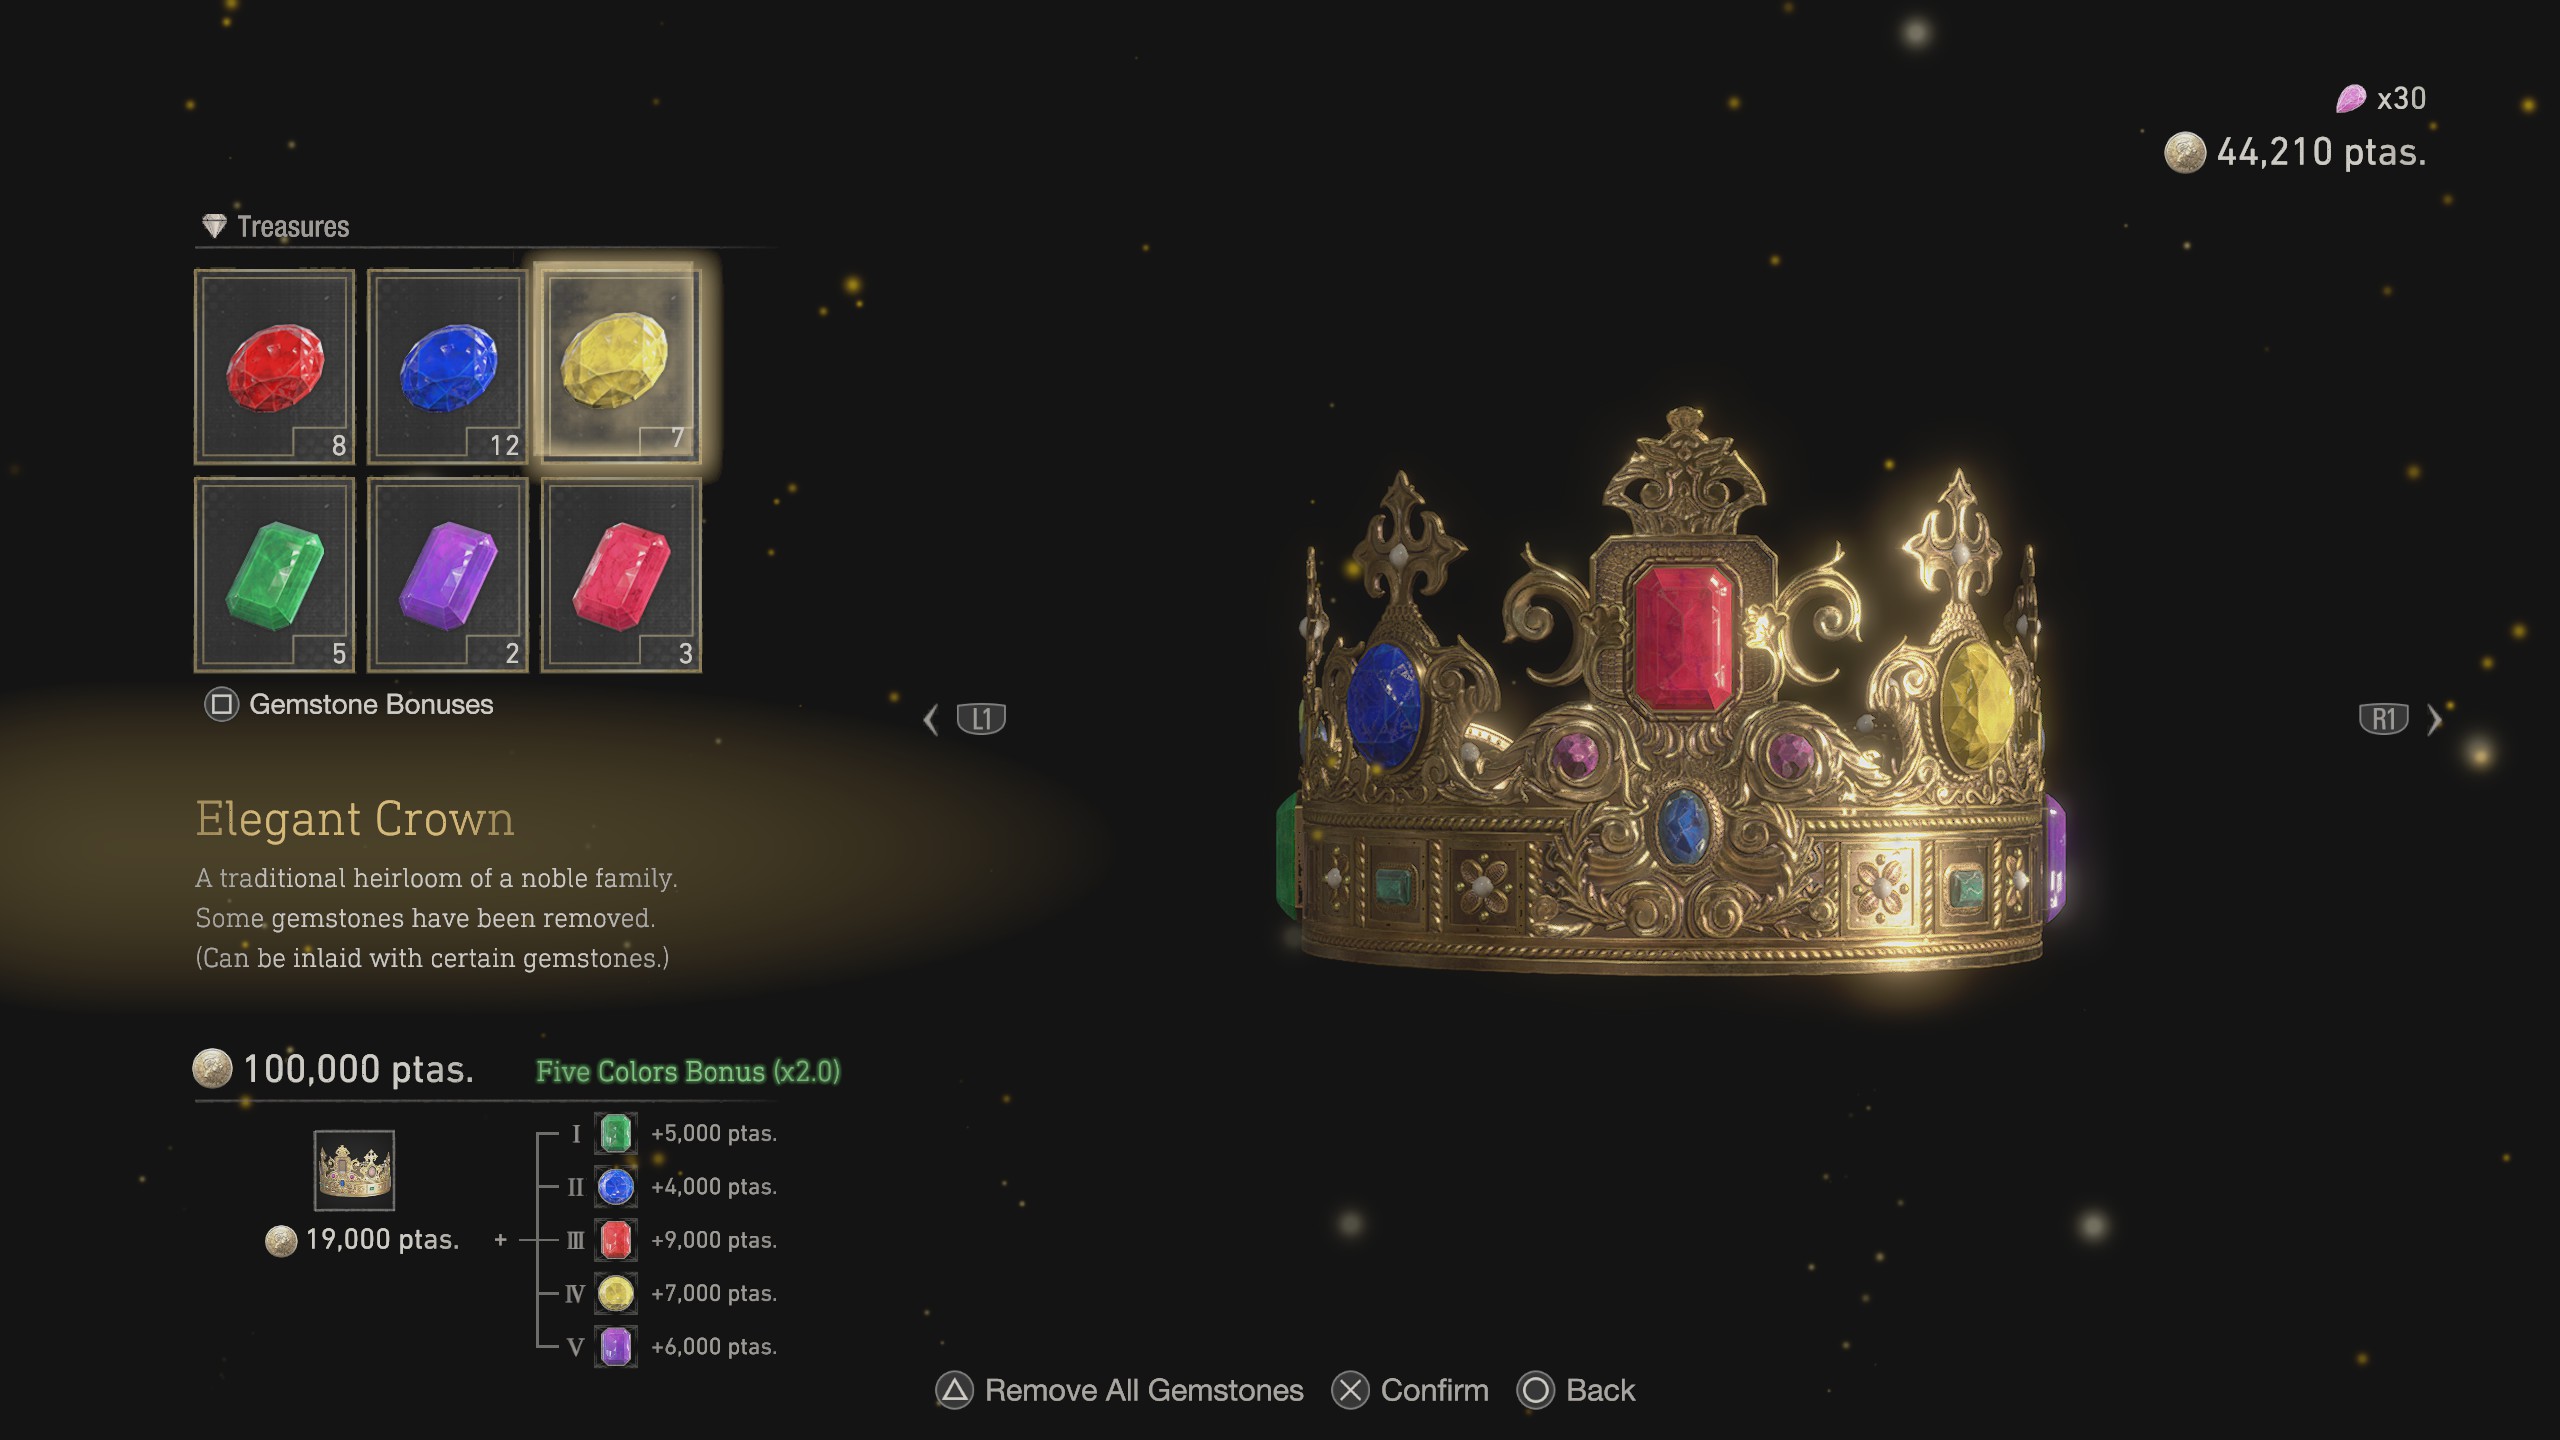 Resident Evil 4 Remake treasure - putting jewels in a crown